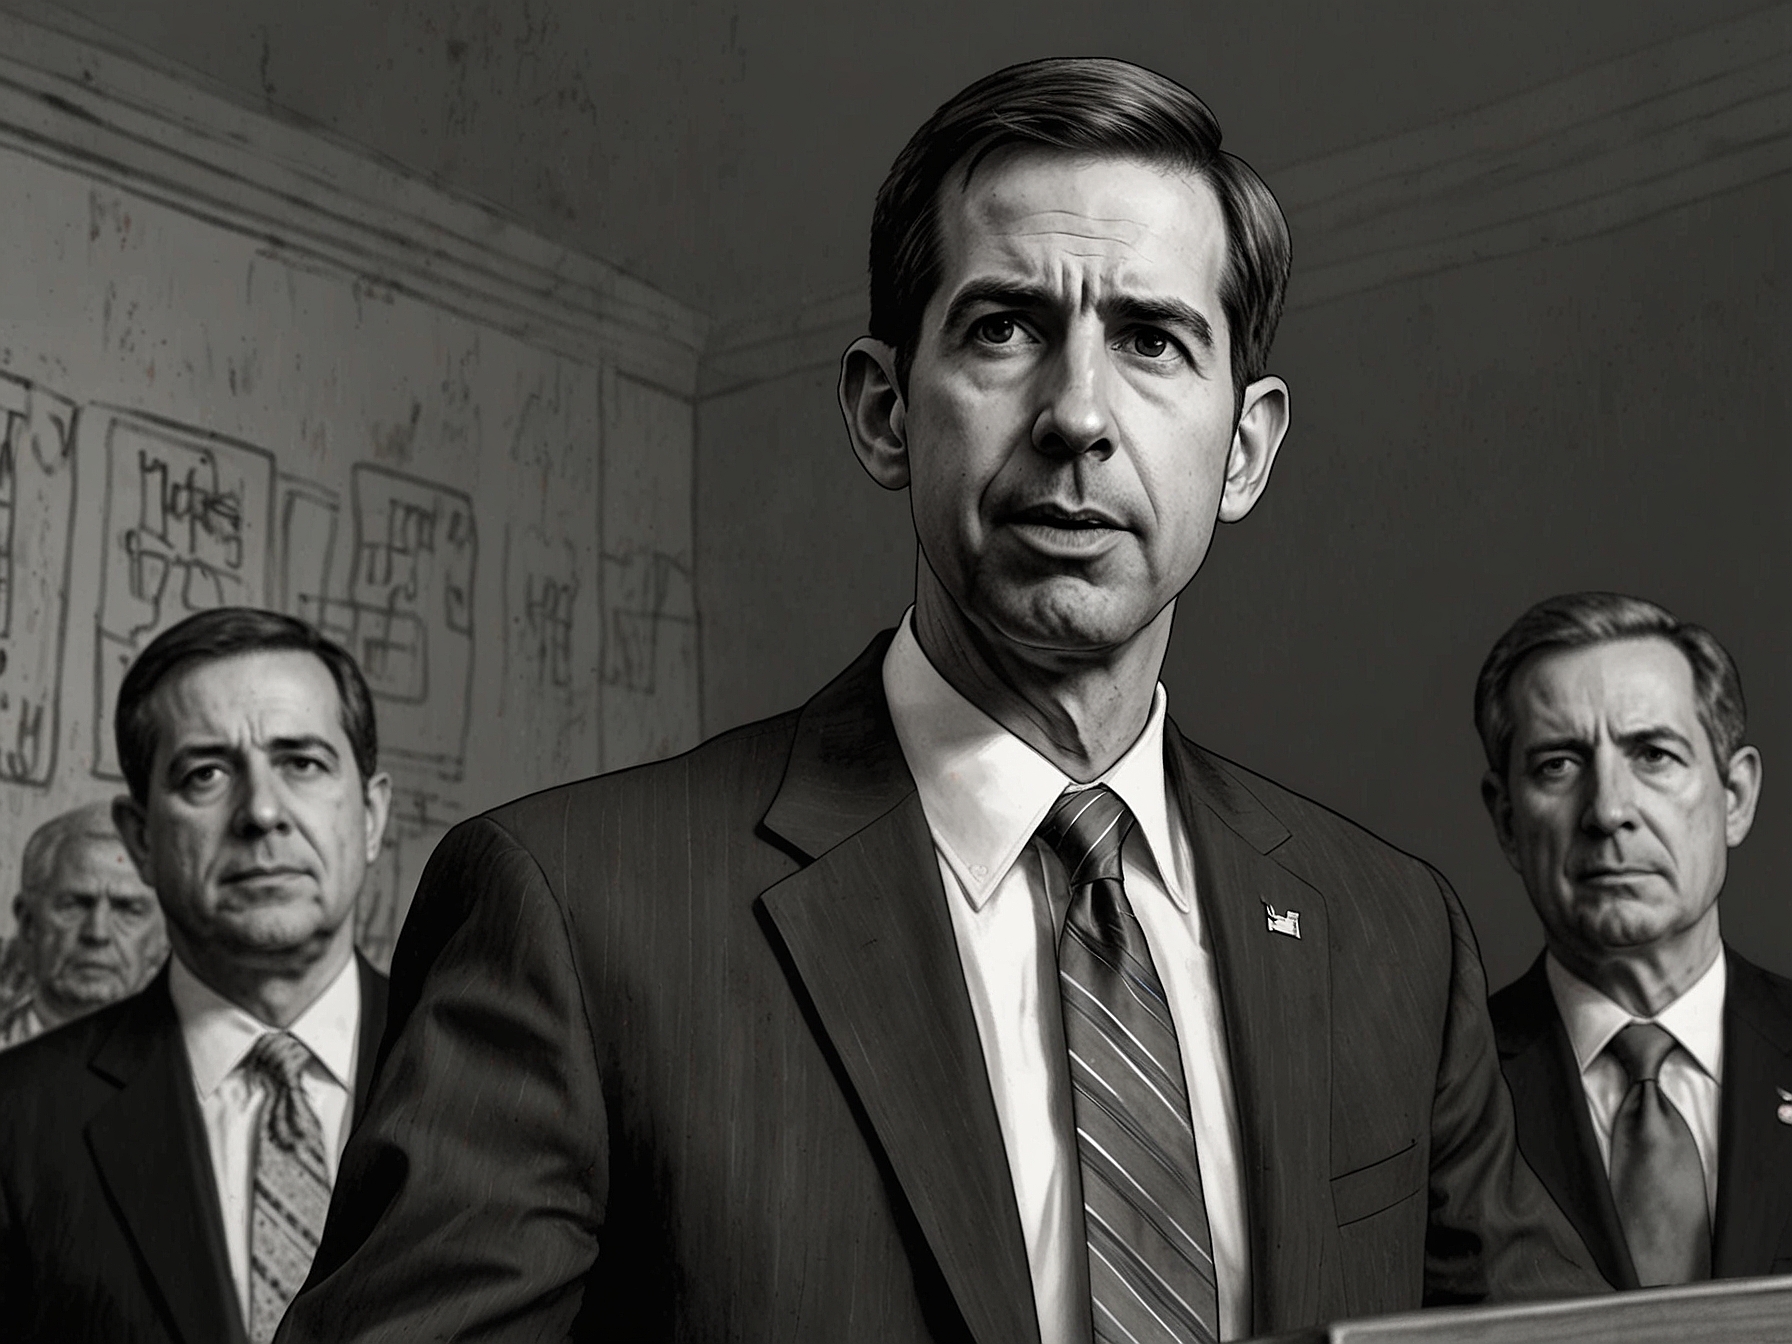 Senator Tom Cotton addressing the media, expressing his concerns about the Biden administration's delay of weapon shipments to Israel, highlighting the urgency and security implications.